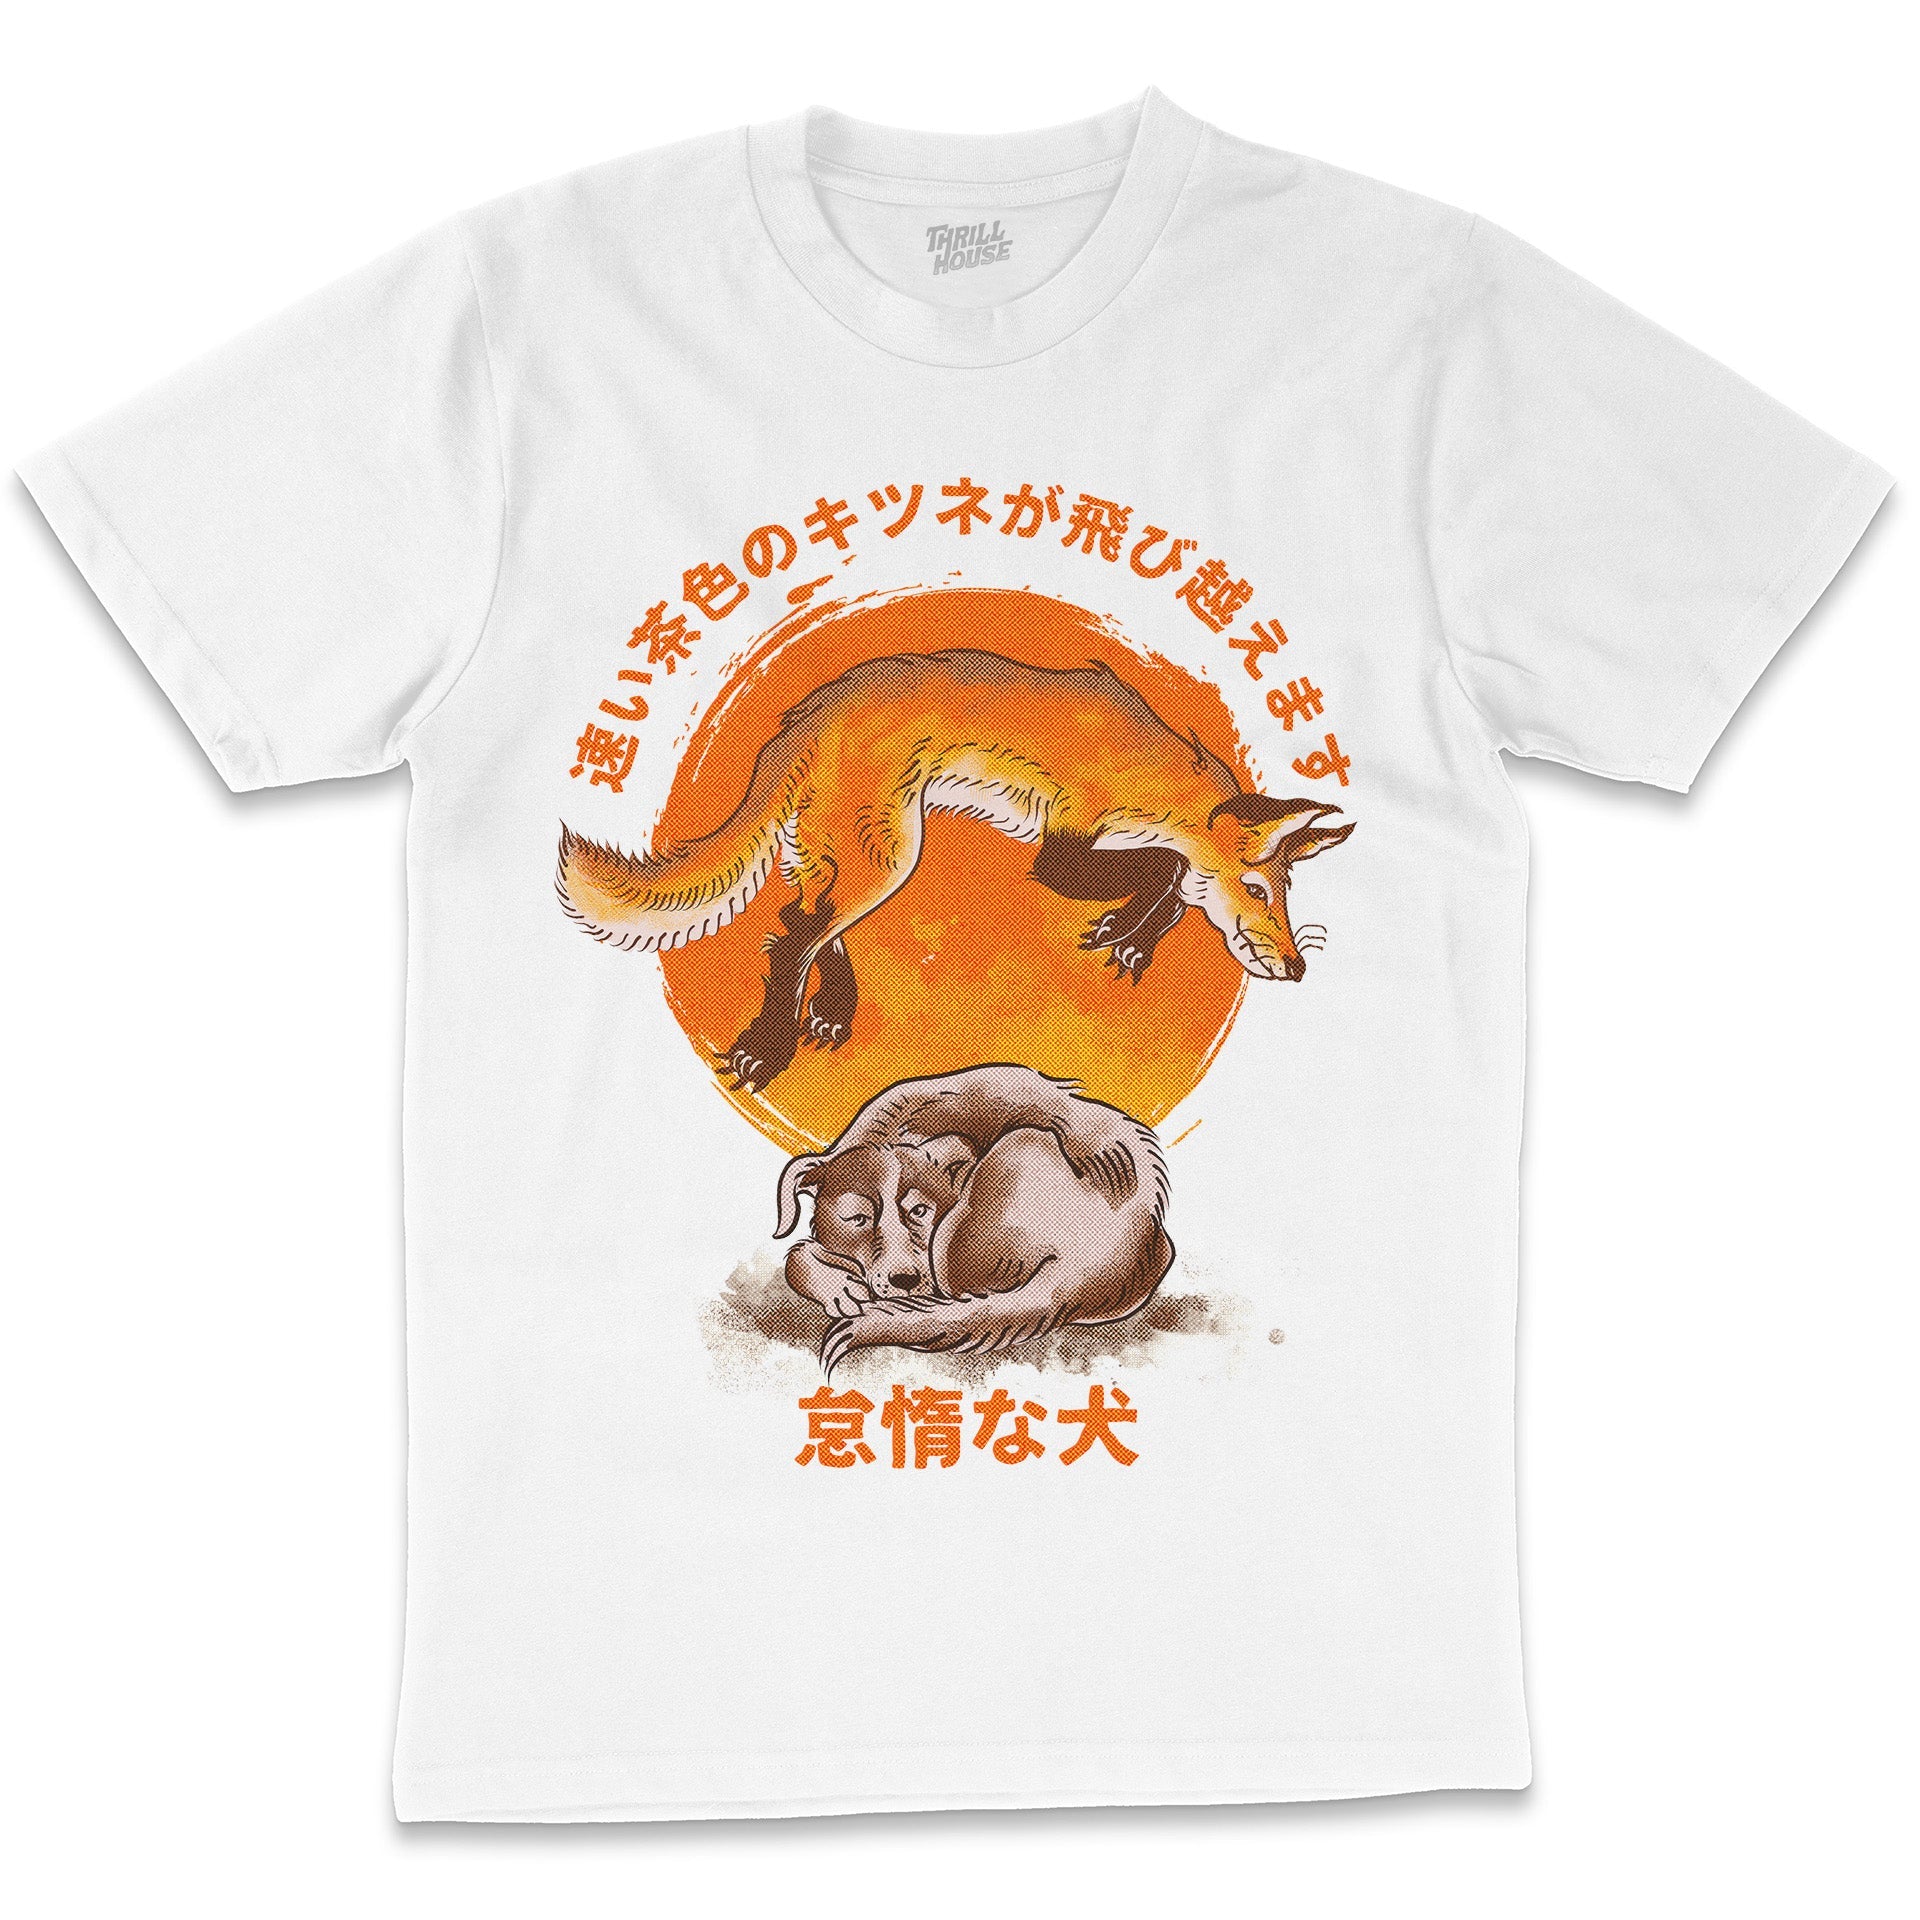 The Quick Brown Fox Jumped Over the Lazy Dog Funny Japanese Style Artsy Cotton T-Shirt